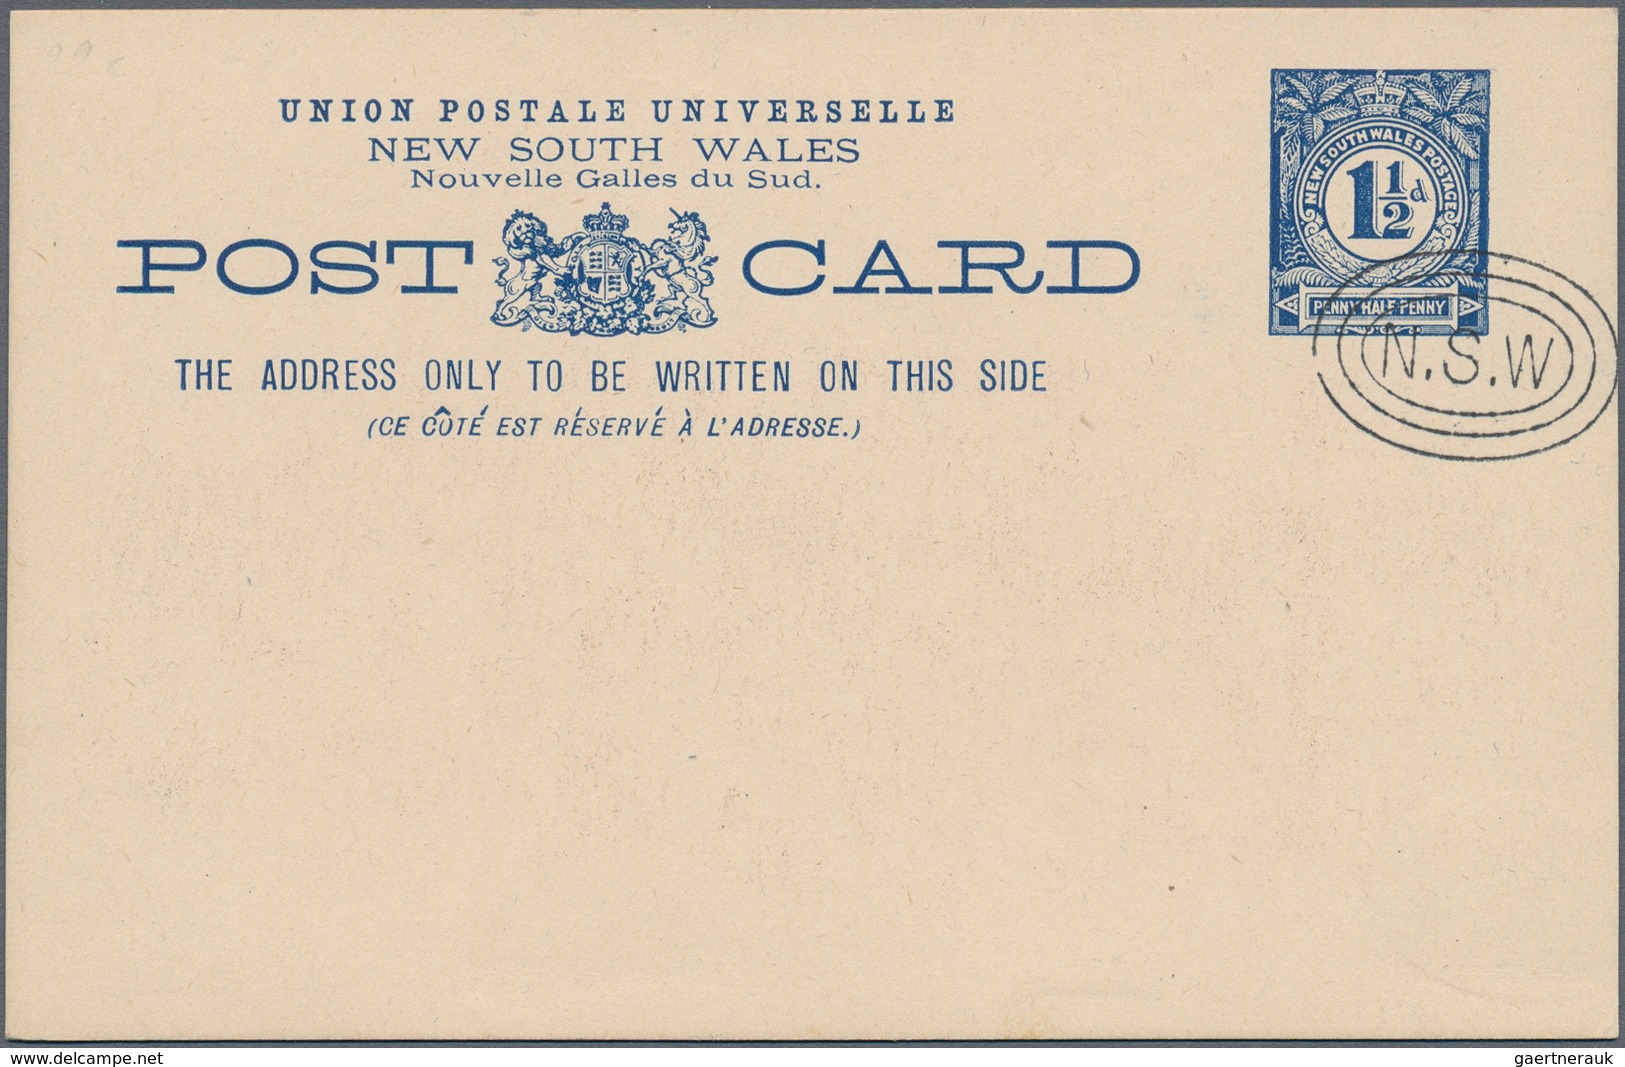 Neusüdwales: 1898/1899, six different pictorial stat. postcards 1½d. blue with pictures on reverse '